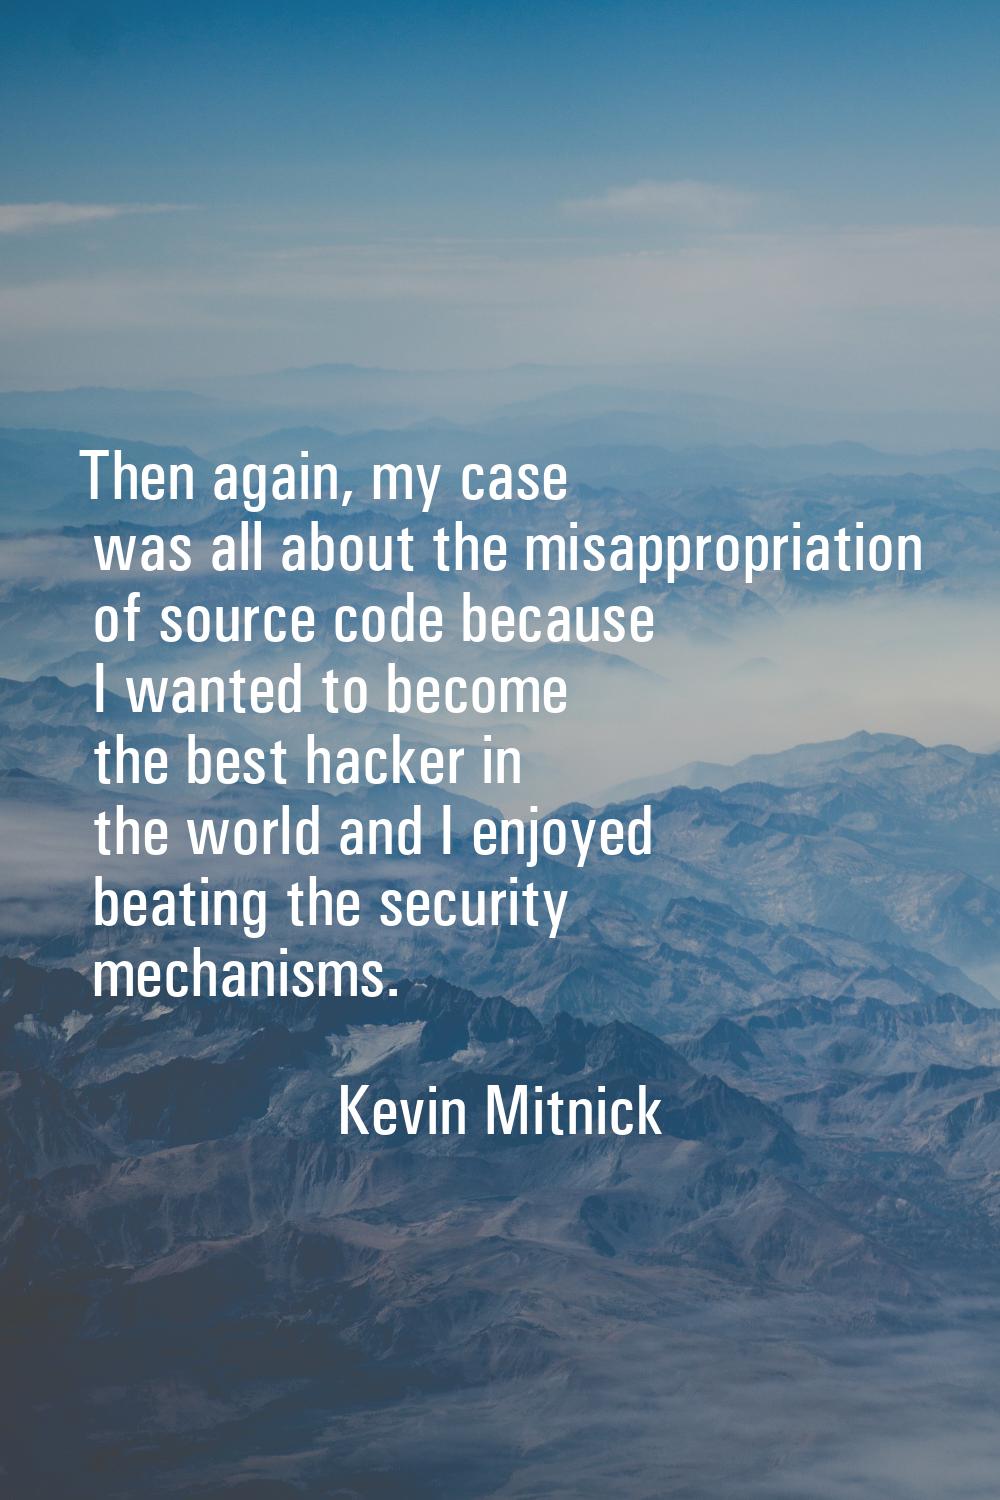 Then again, my case was all about the misappropriation of source code because I wanted to become th